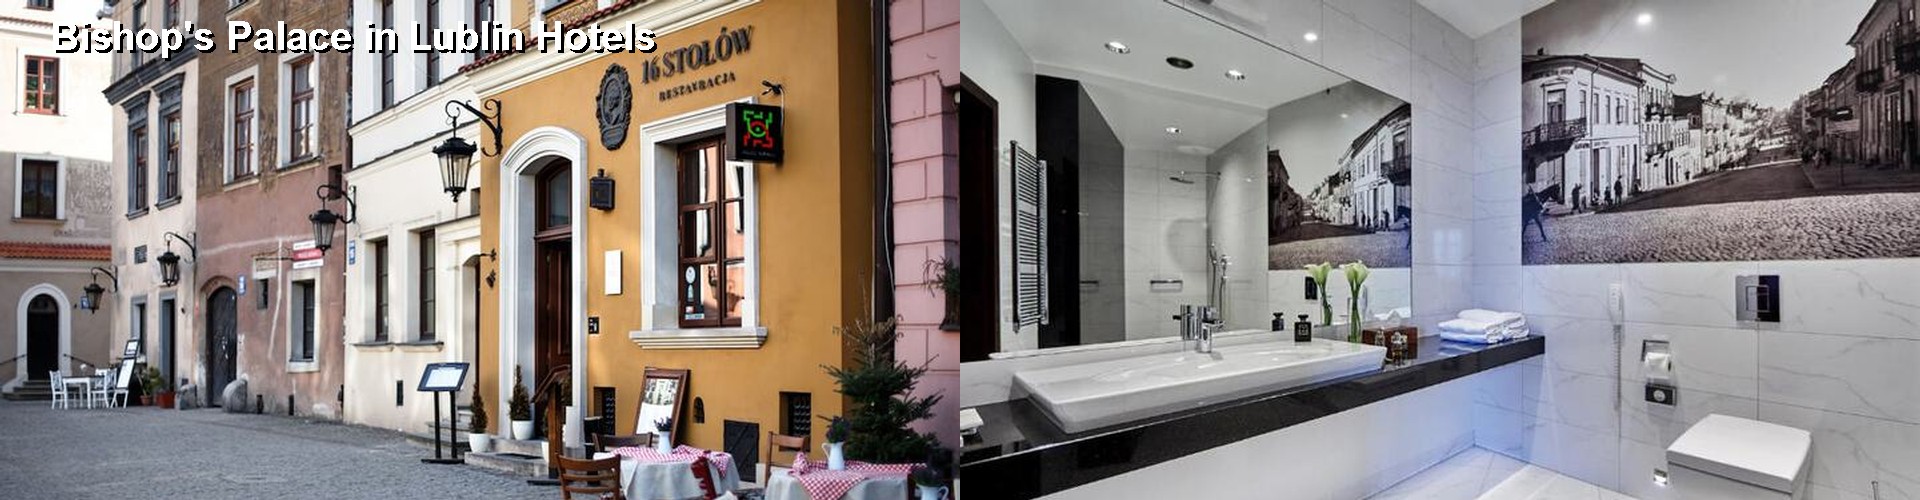 2 Best Hotels near Bishop's Palace in Lublin